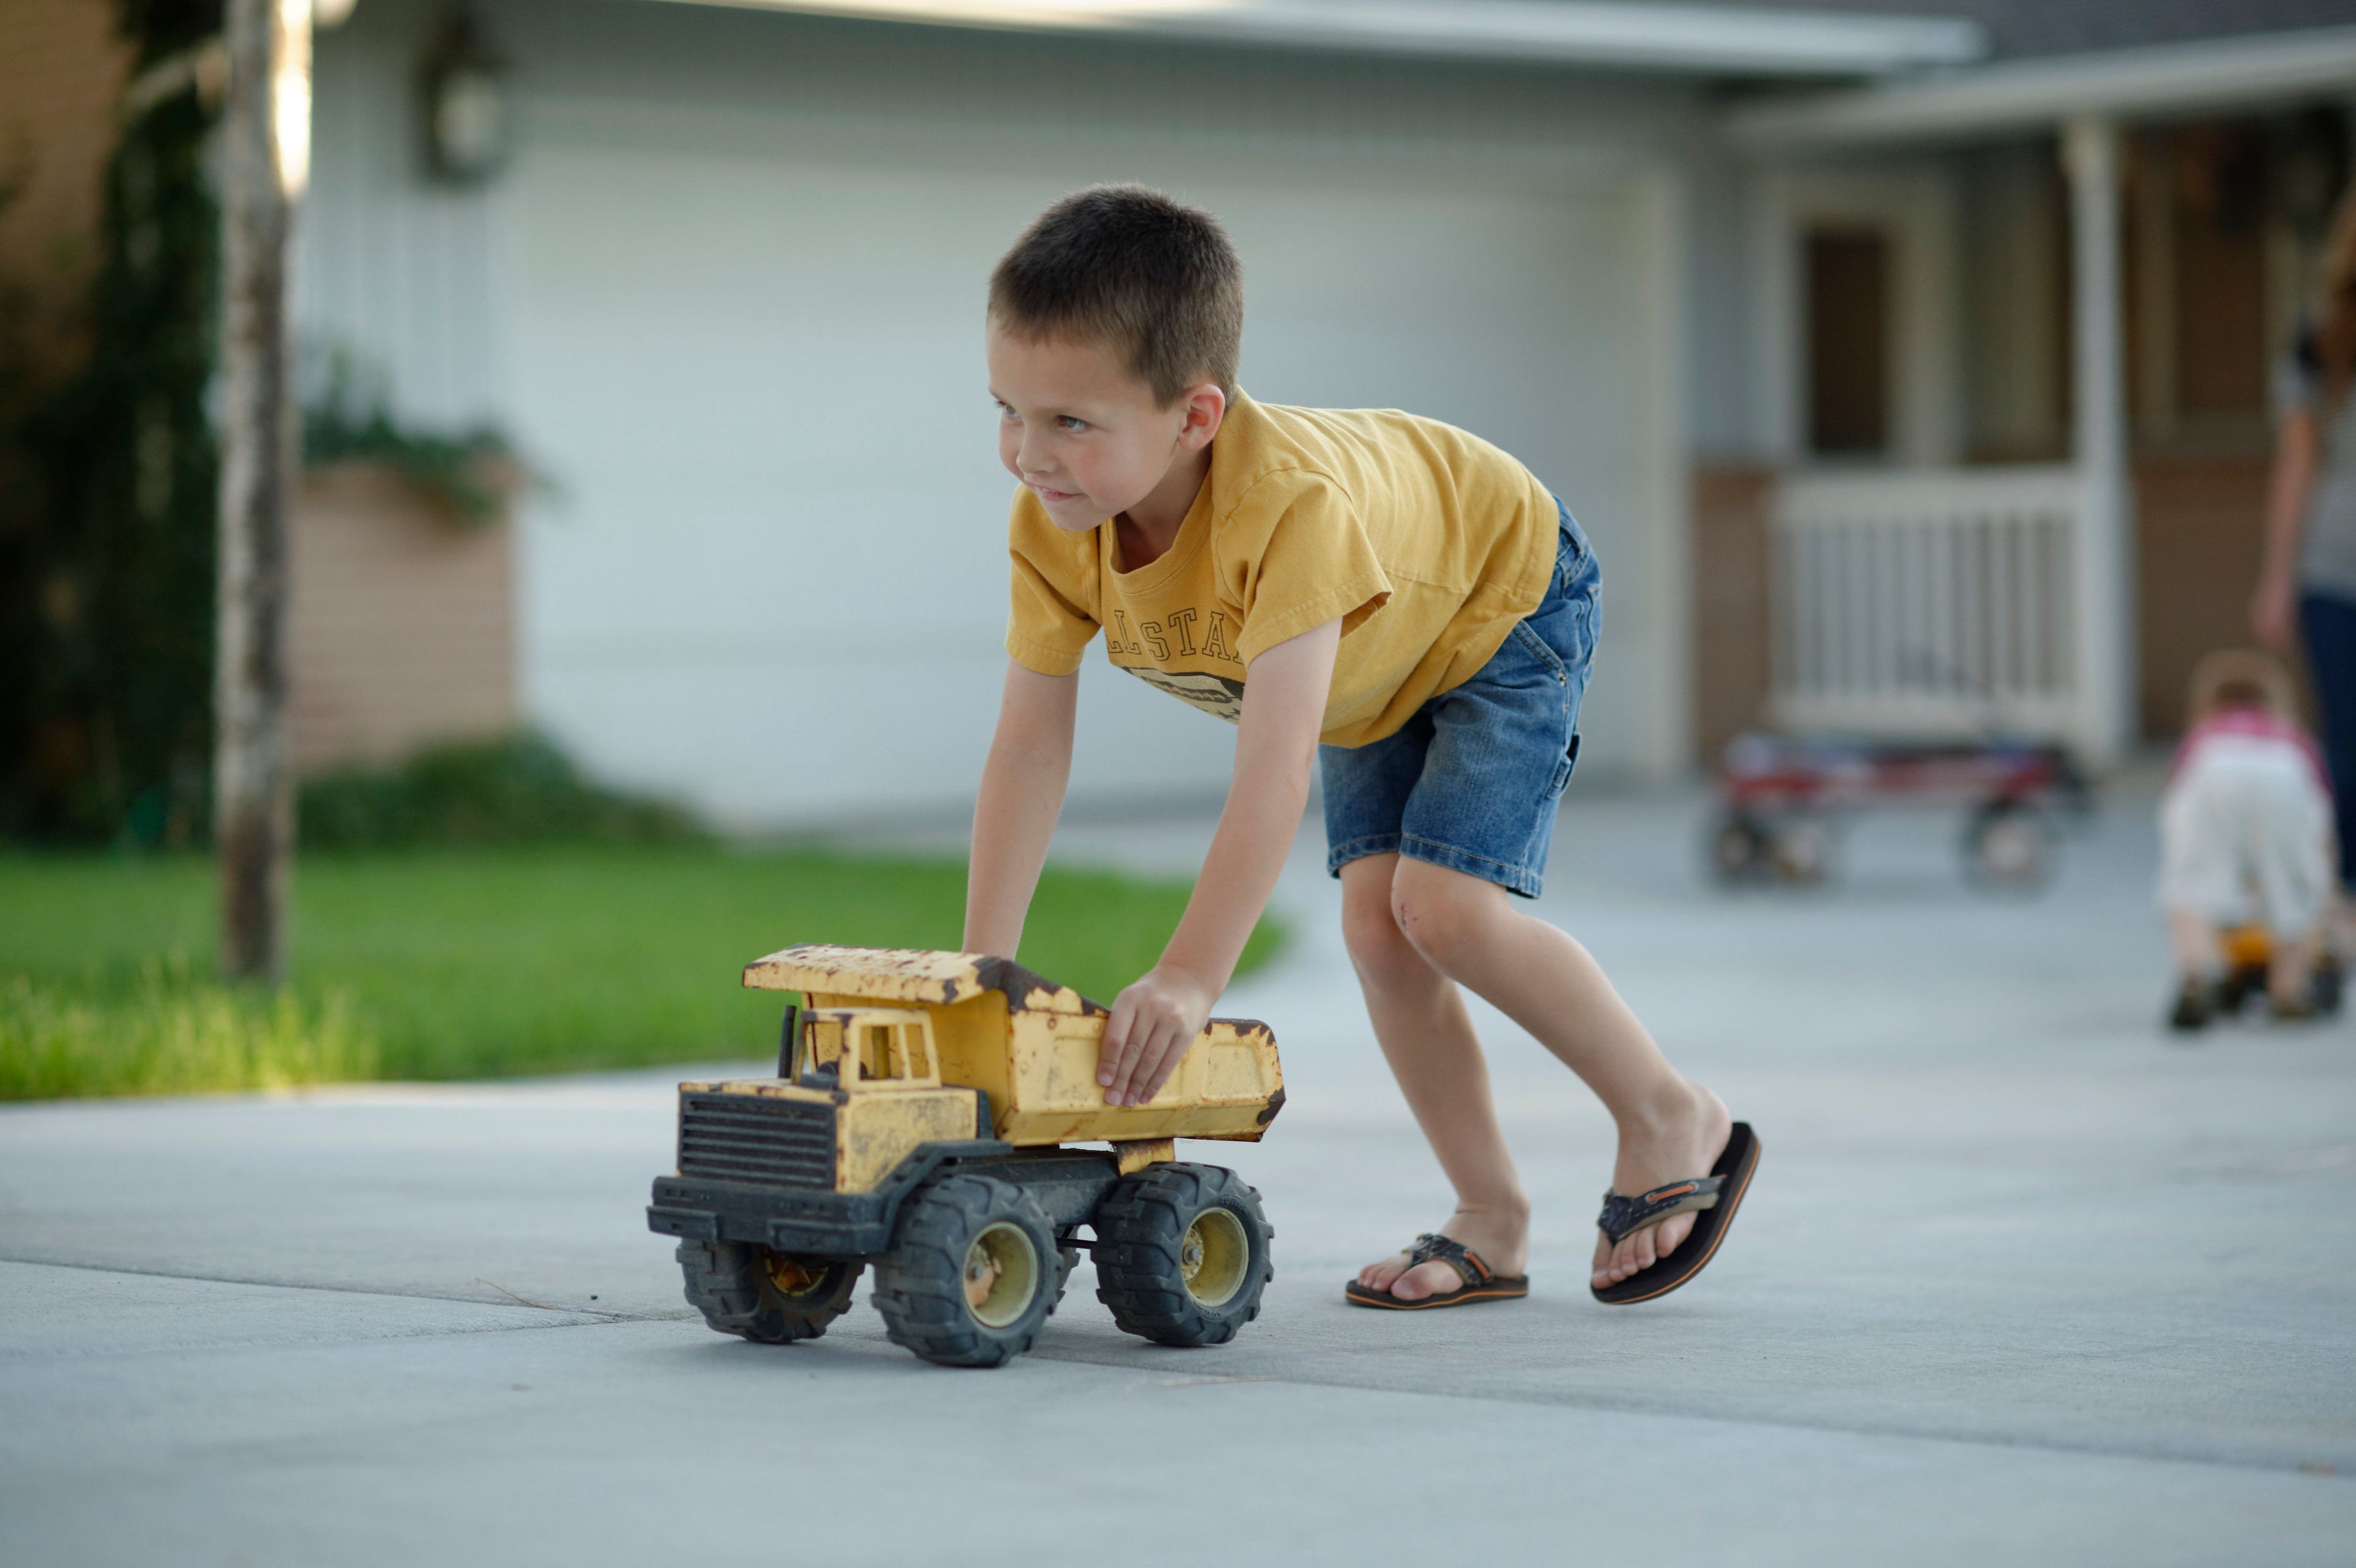 A young boy plays with a toy dump truck.  